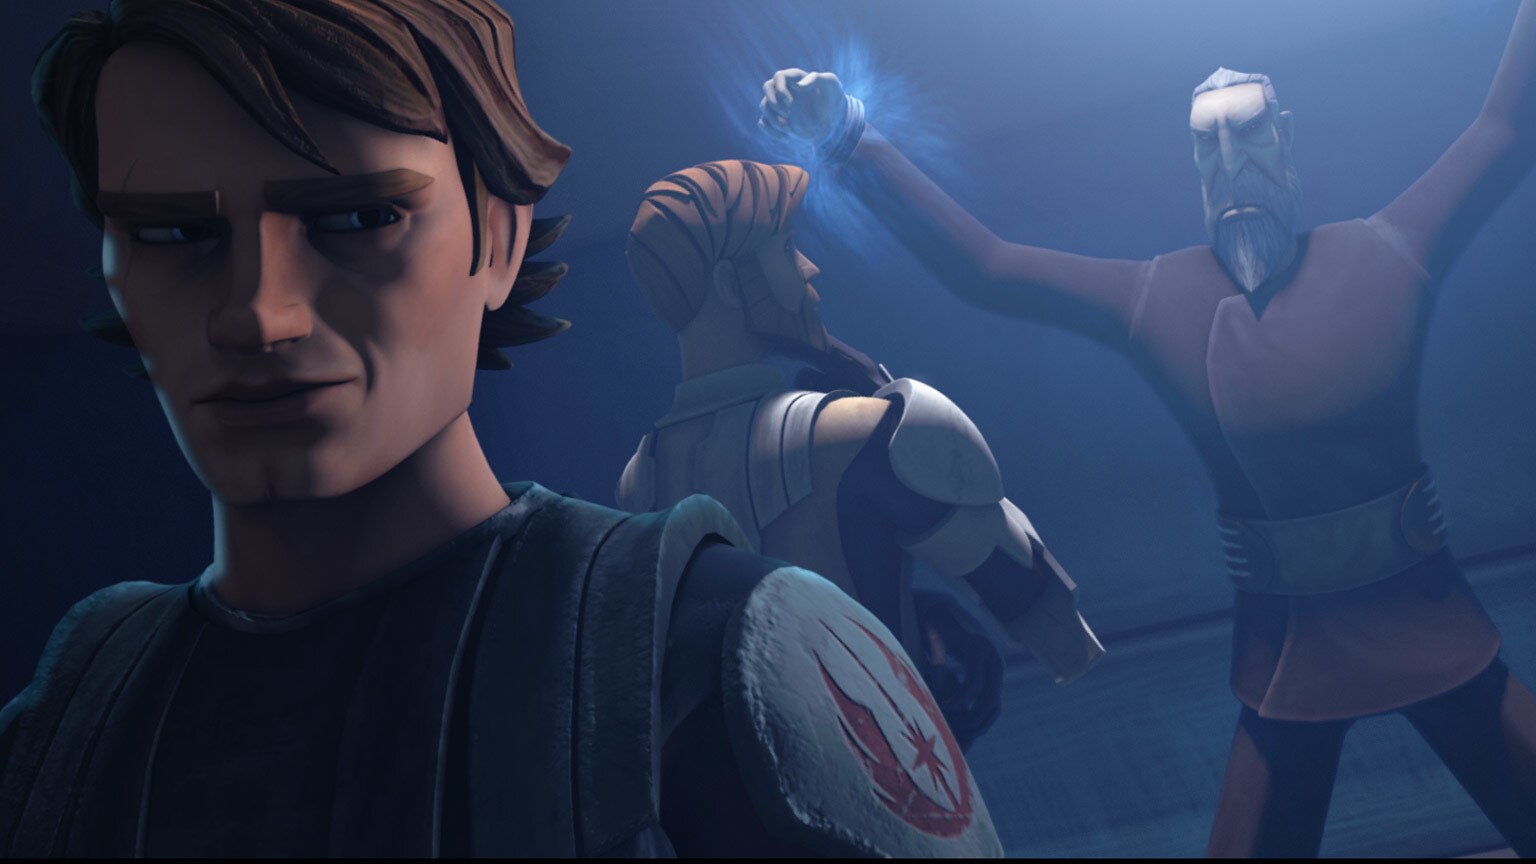 Obi-Wan and Anakin confront Dooku in a scene from "Dooku Captured."